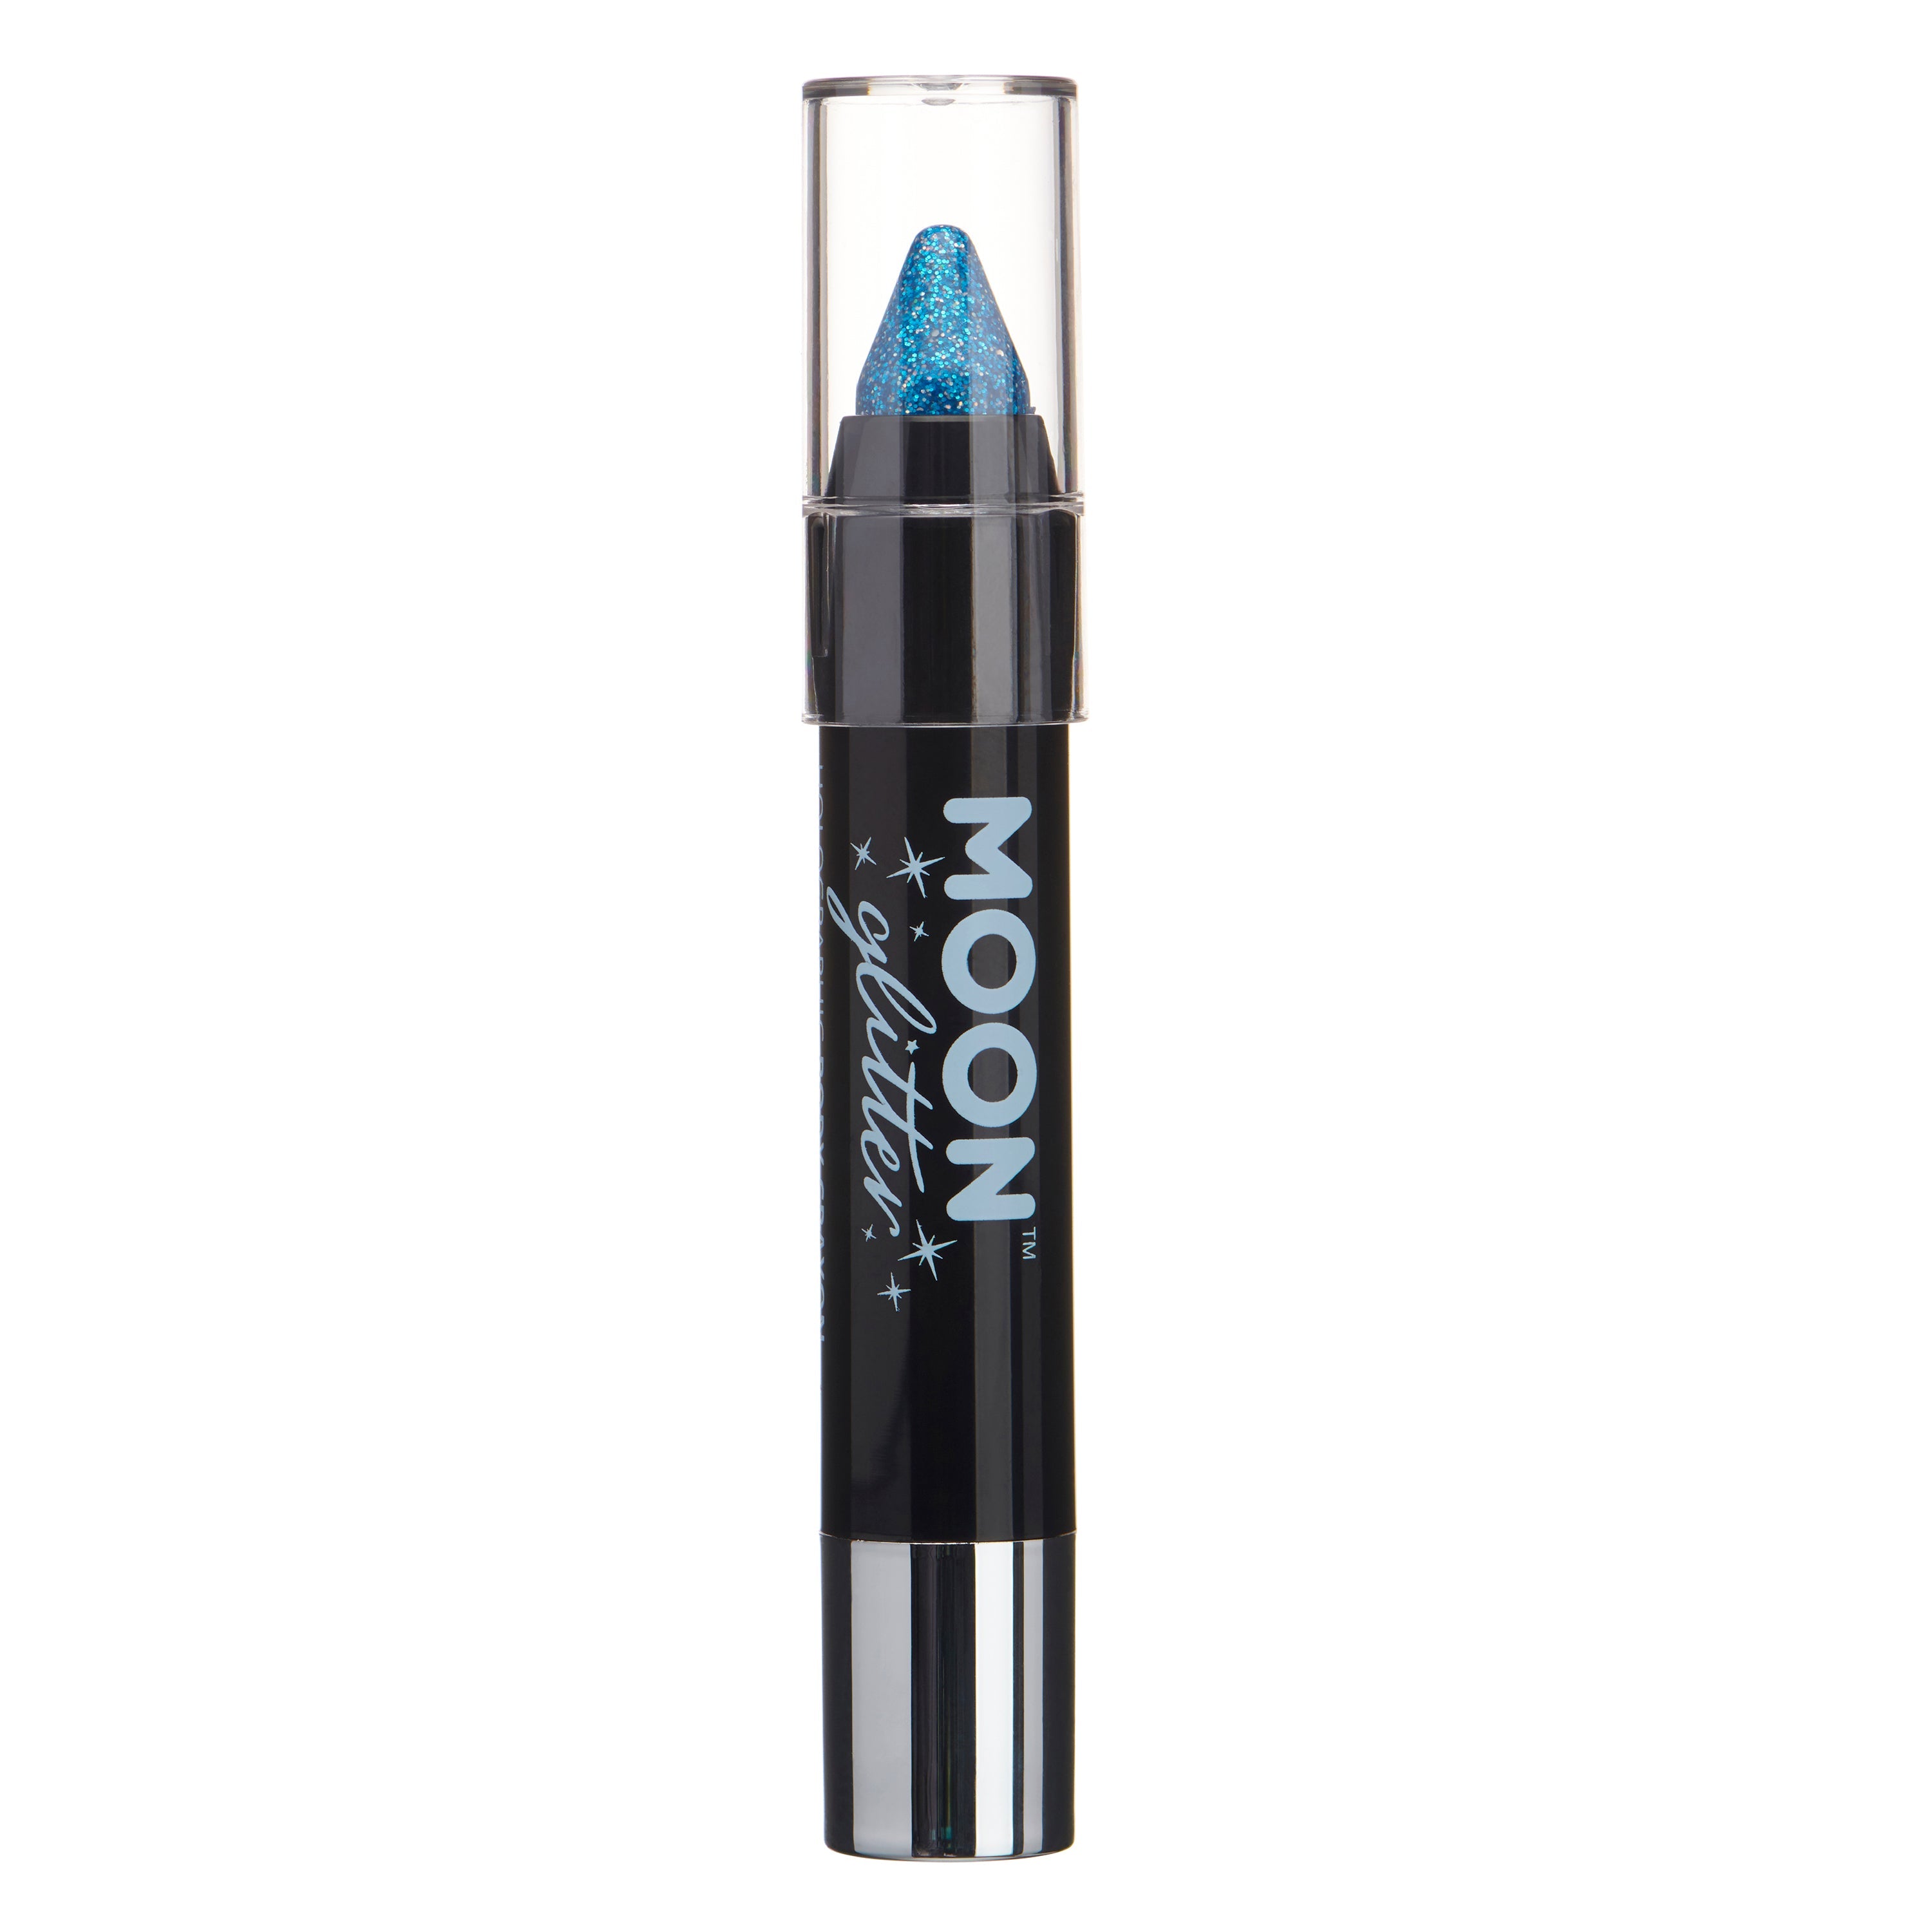 Blue - Holographic Glitter Face & Body Crayon, 3.5g. Cosmetically certified, FDA & Health Canada compliant and cruelty free.